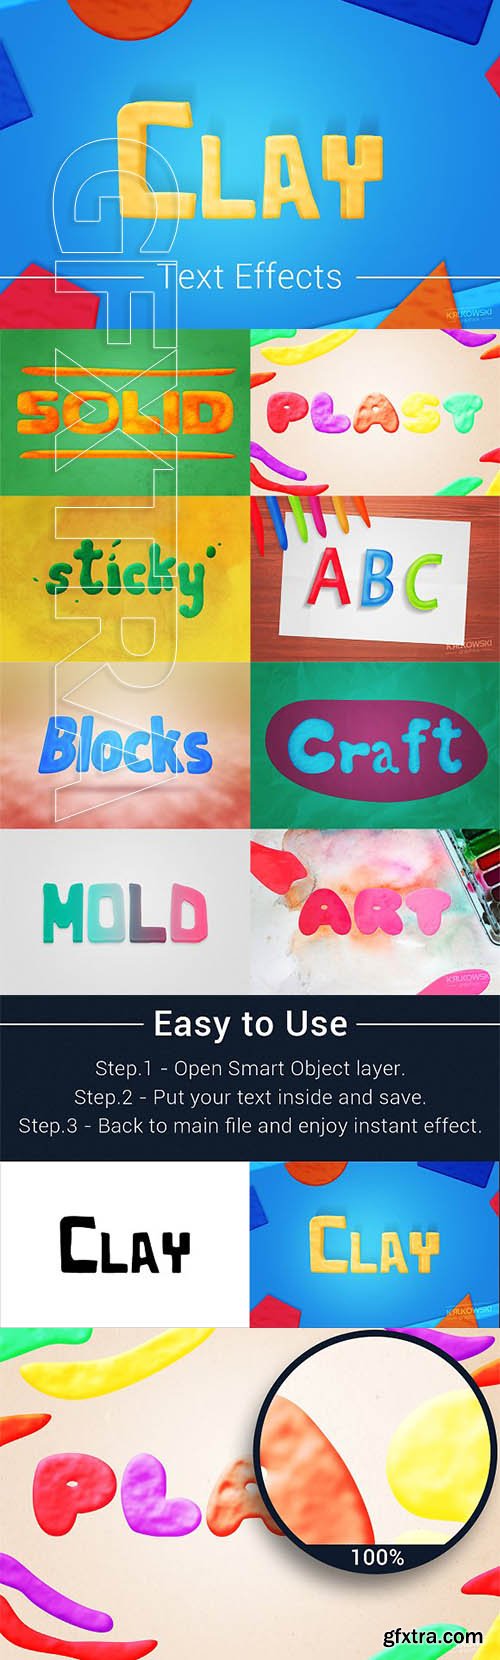 CreativeMarket - Modelling Clay Text Effects Mockup 2128742